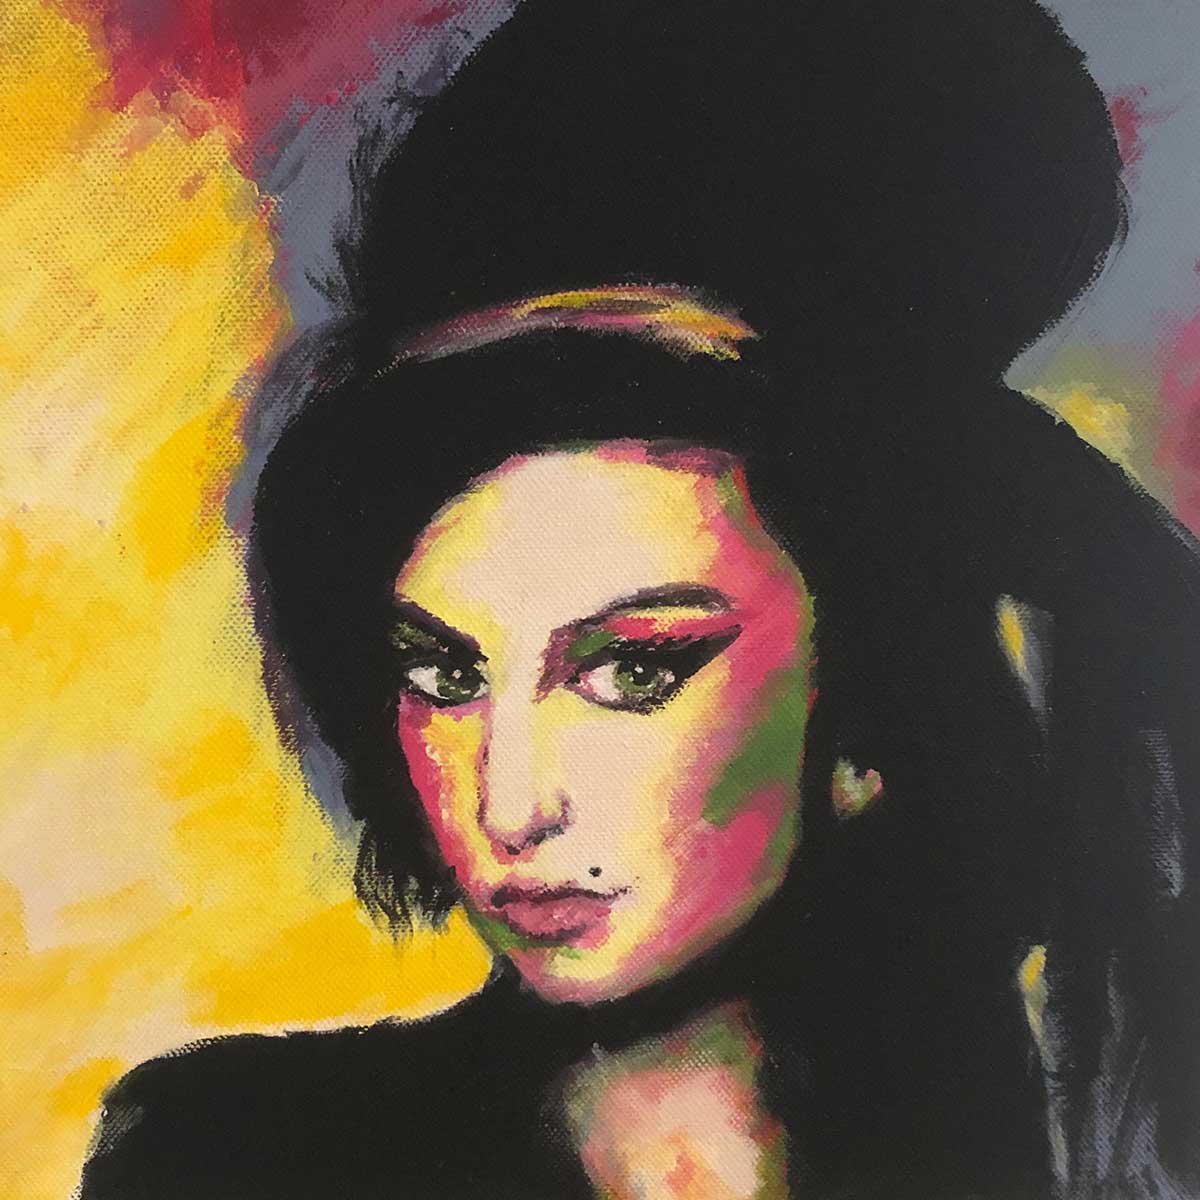 Amy Winehouse - You know I’m no good - Formaat 30 x 30 cm. - Acryl op doek